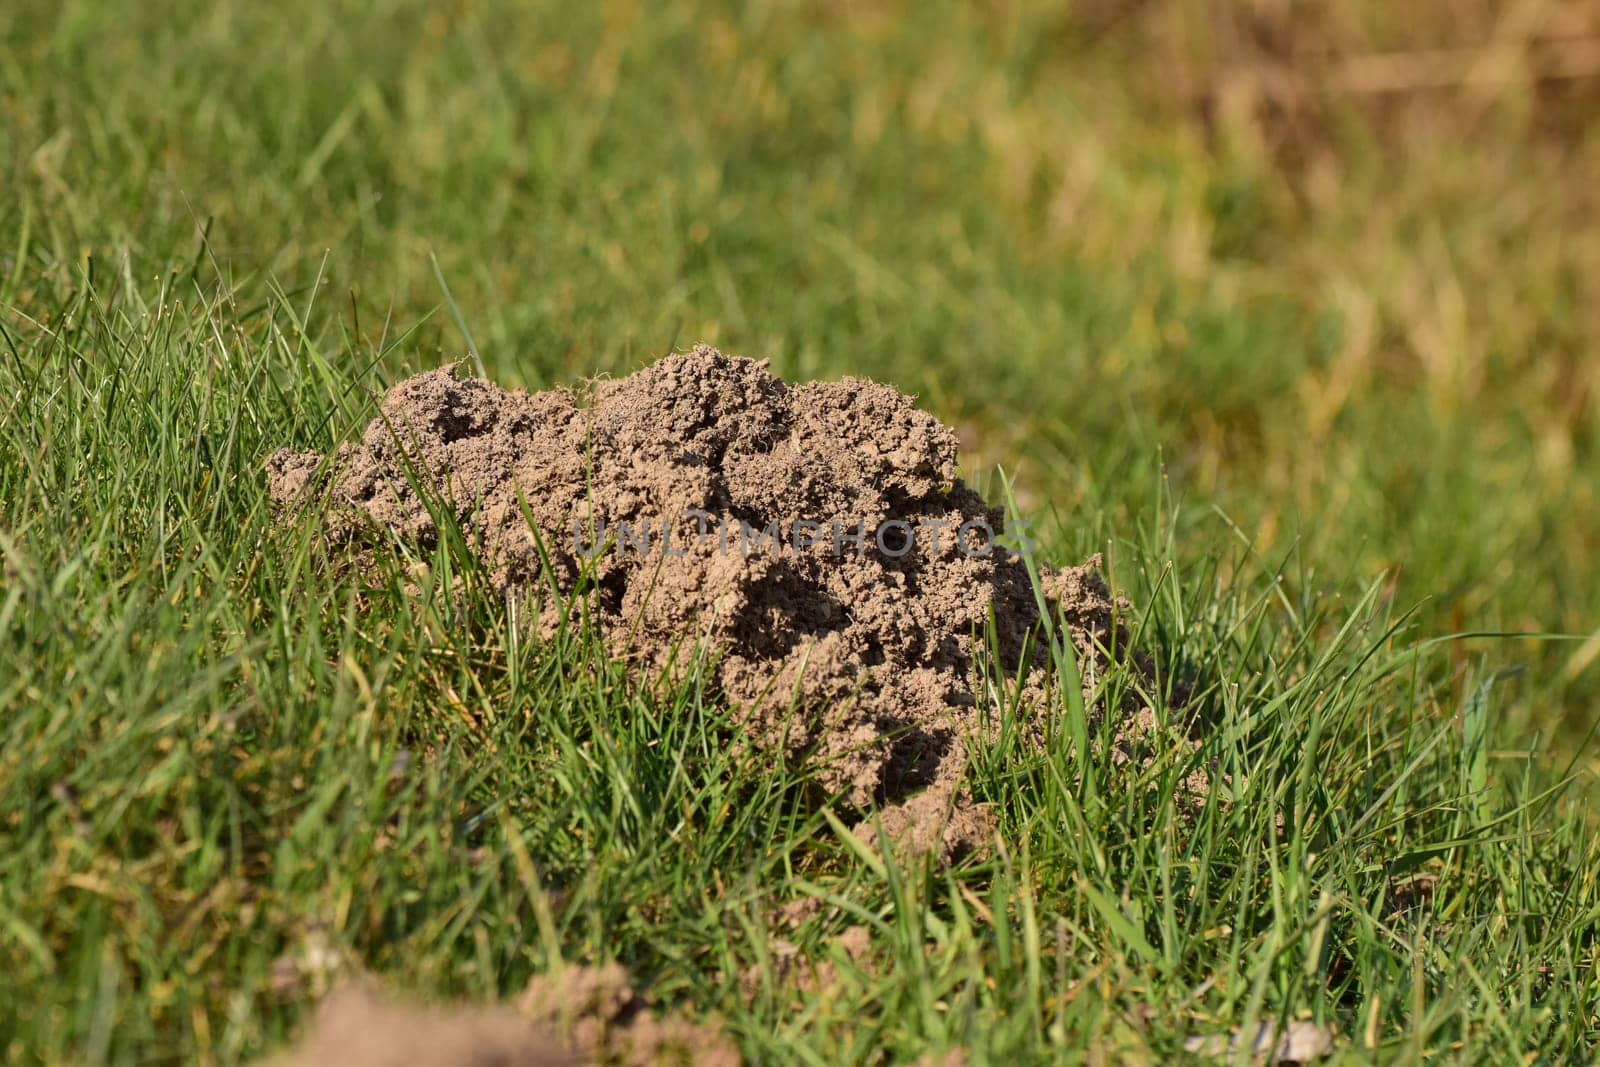 Mole pile on a dike as a close up by Luise123